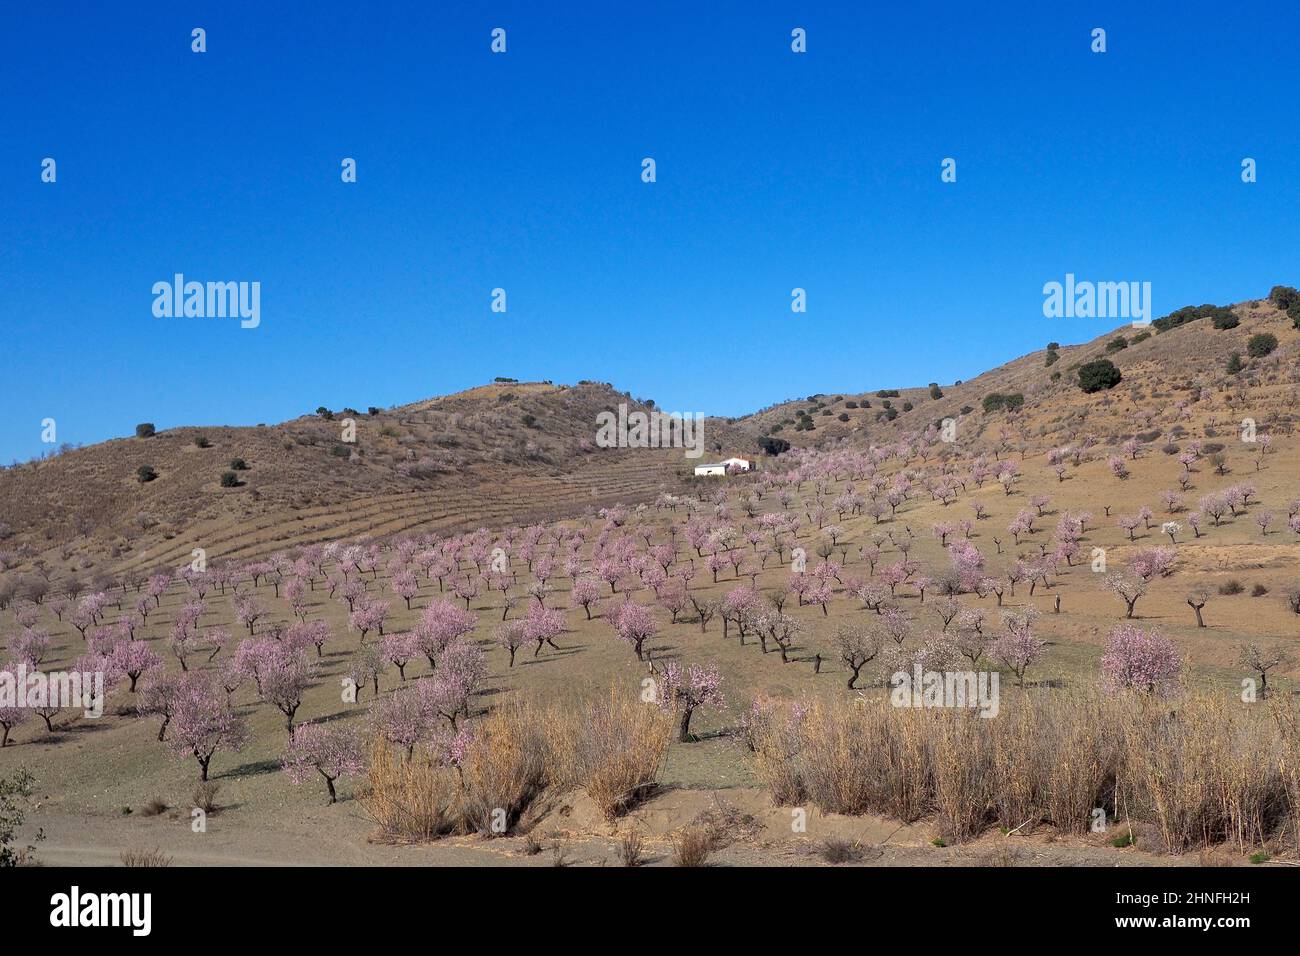 Several flowering almond trees in front of country house on hillside, almond plantation in full bloom, hilly landscape with house, Velez-Rubio Stock Photo